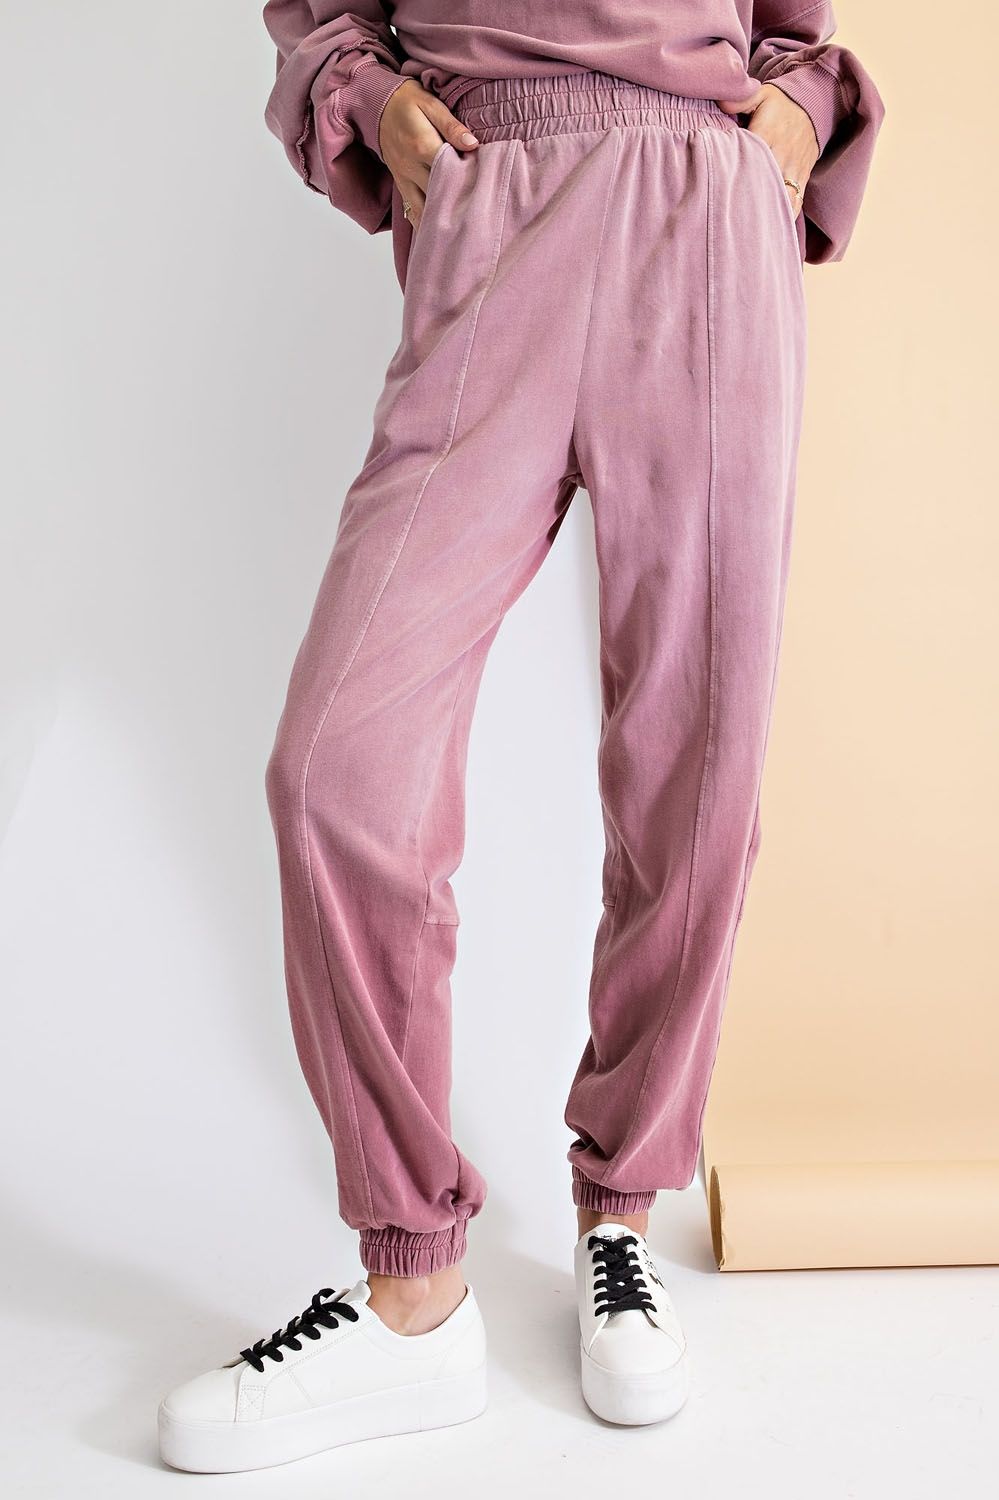 Buy Easel Ombre Terry Deep Dye Drawstring Loosefit Jogger Pants by Sensual Fashion Boutique by Sensual Fashion Boutique